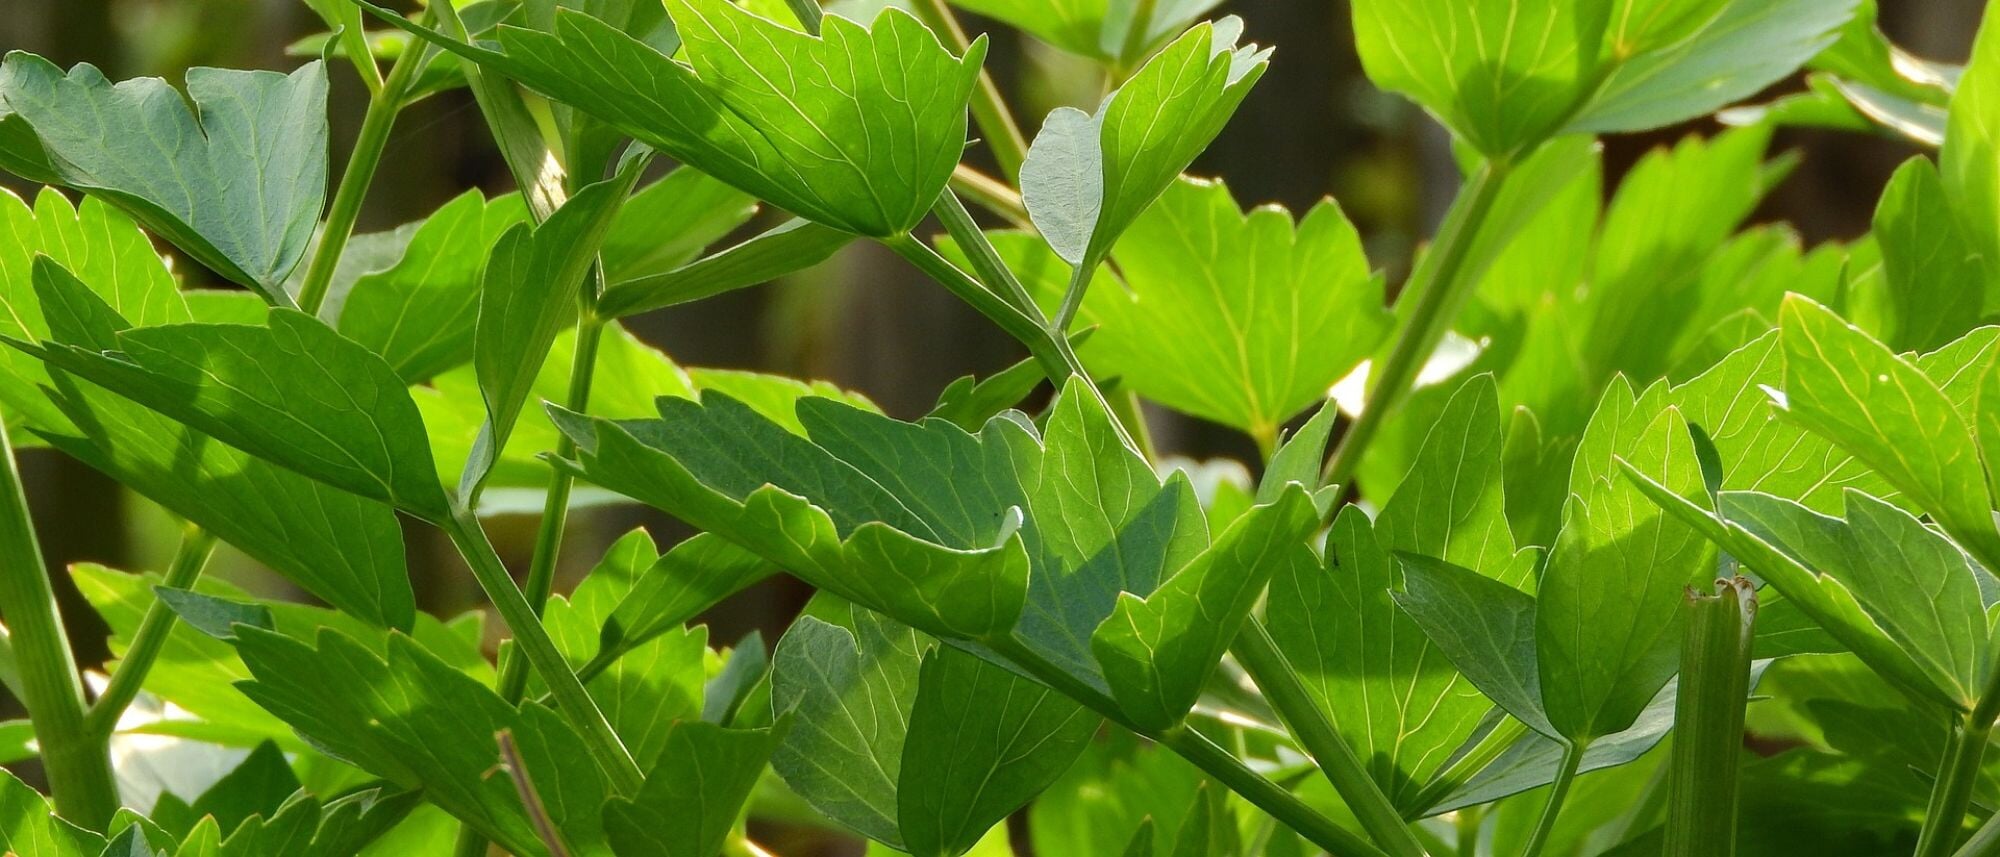 Grow lovage in your home herb garden